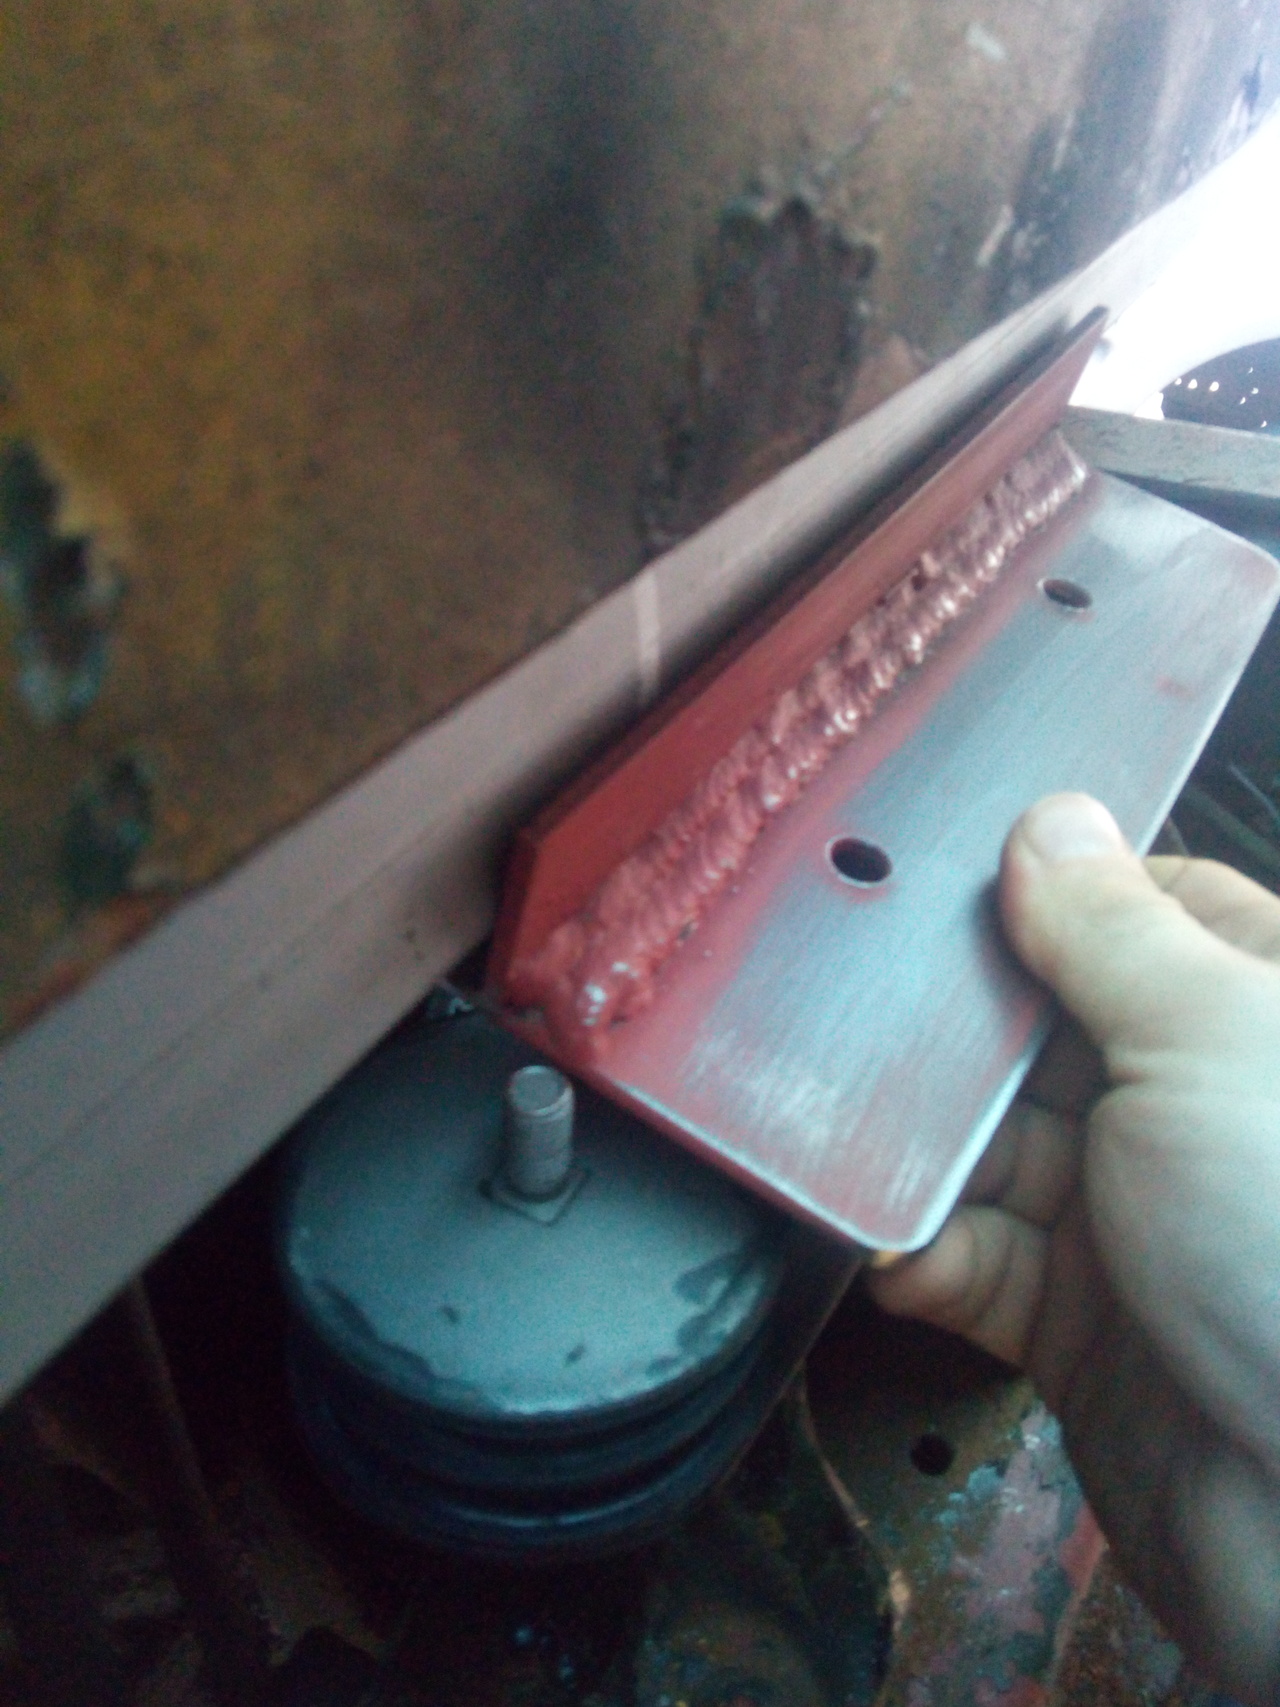 A hand holding up a bracket to the new rear cab cross-member. The
bracket has two holes drilled in it, for the top studs of the rubber
mounts, and a reinforcing tab that will help spread the load along the
crossmember. The reinforcing tab is in the wrong place and is
preventing the bracket from fitting.